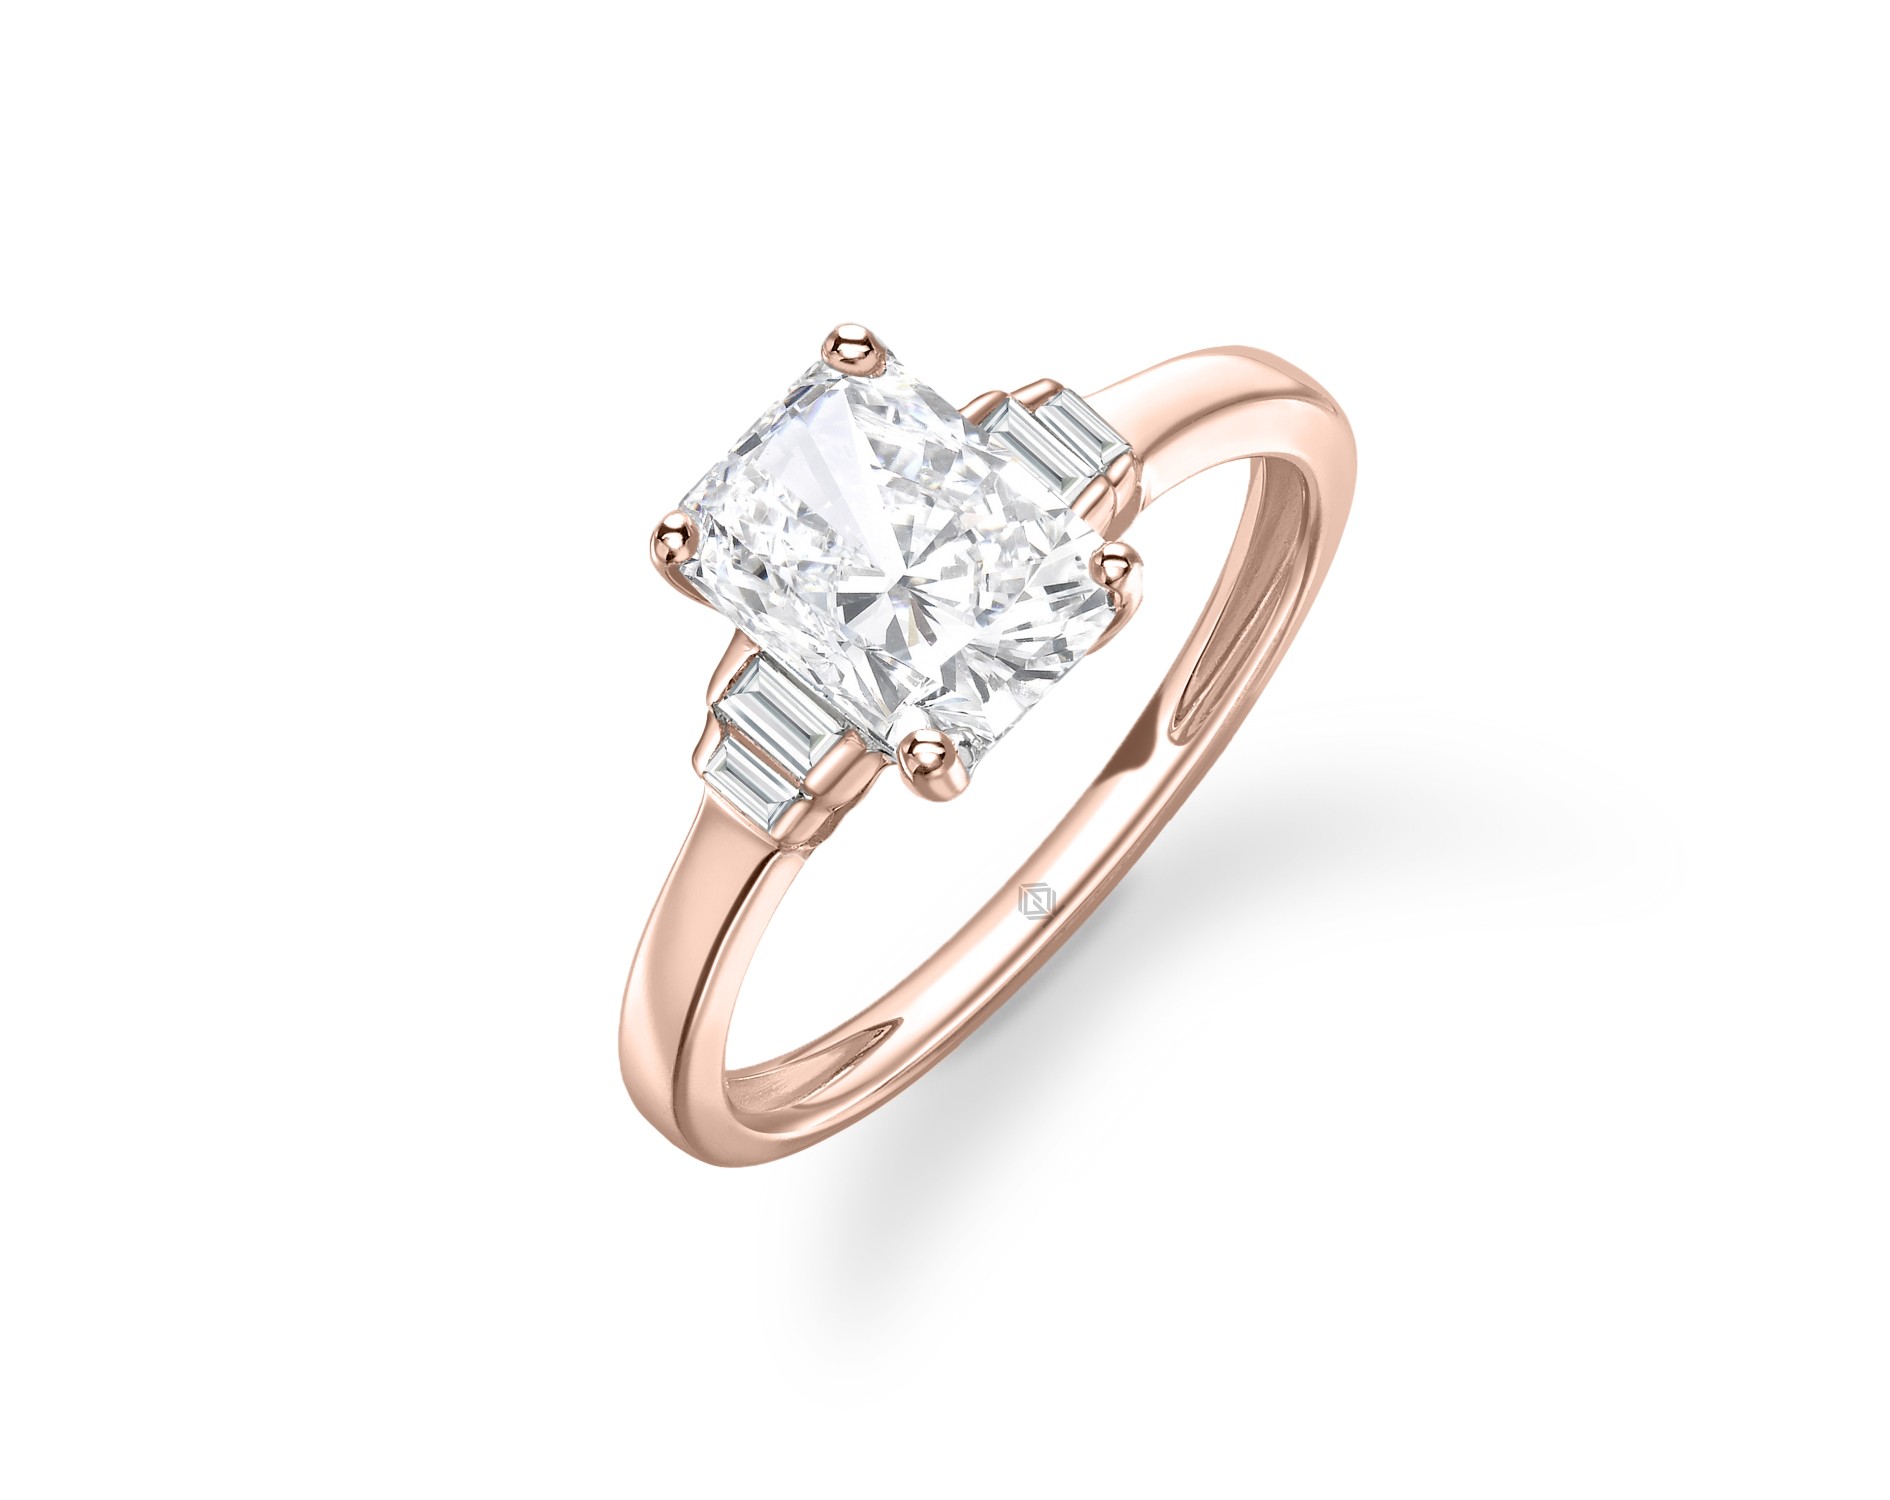 18K ROSE GOLD RADIANT CUT DIAMOND RING WITH BAGUETTES CUT SIDE STONES